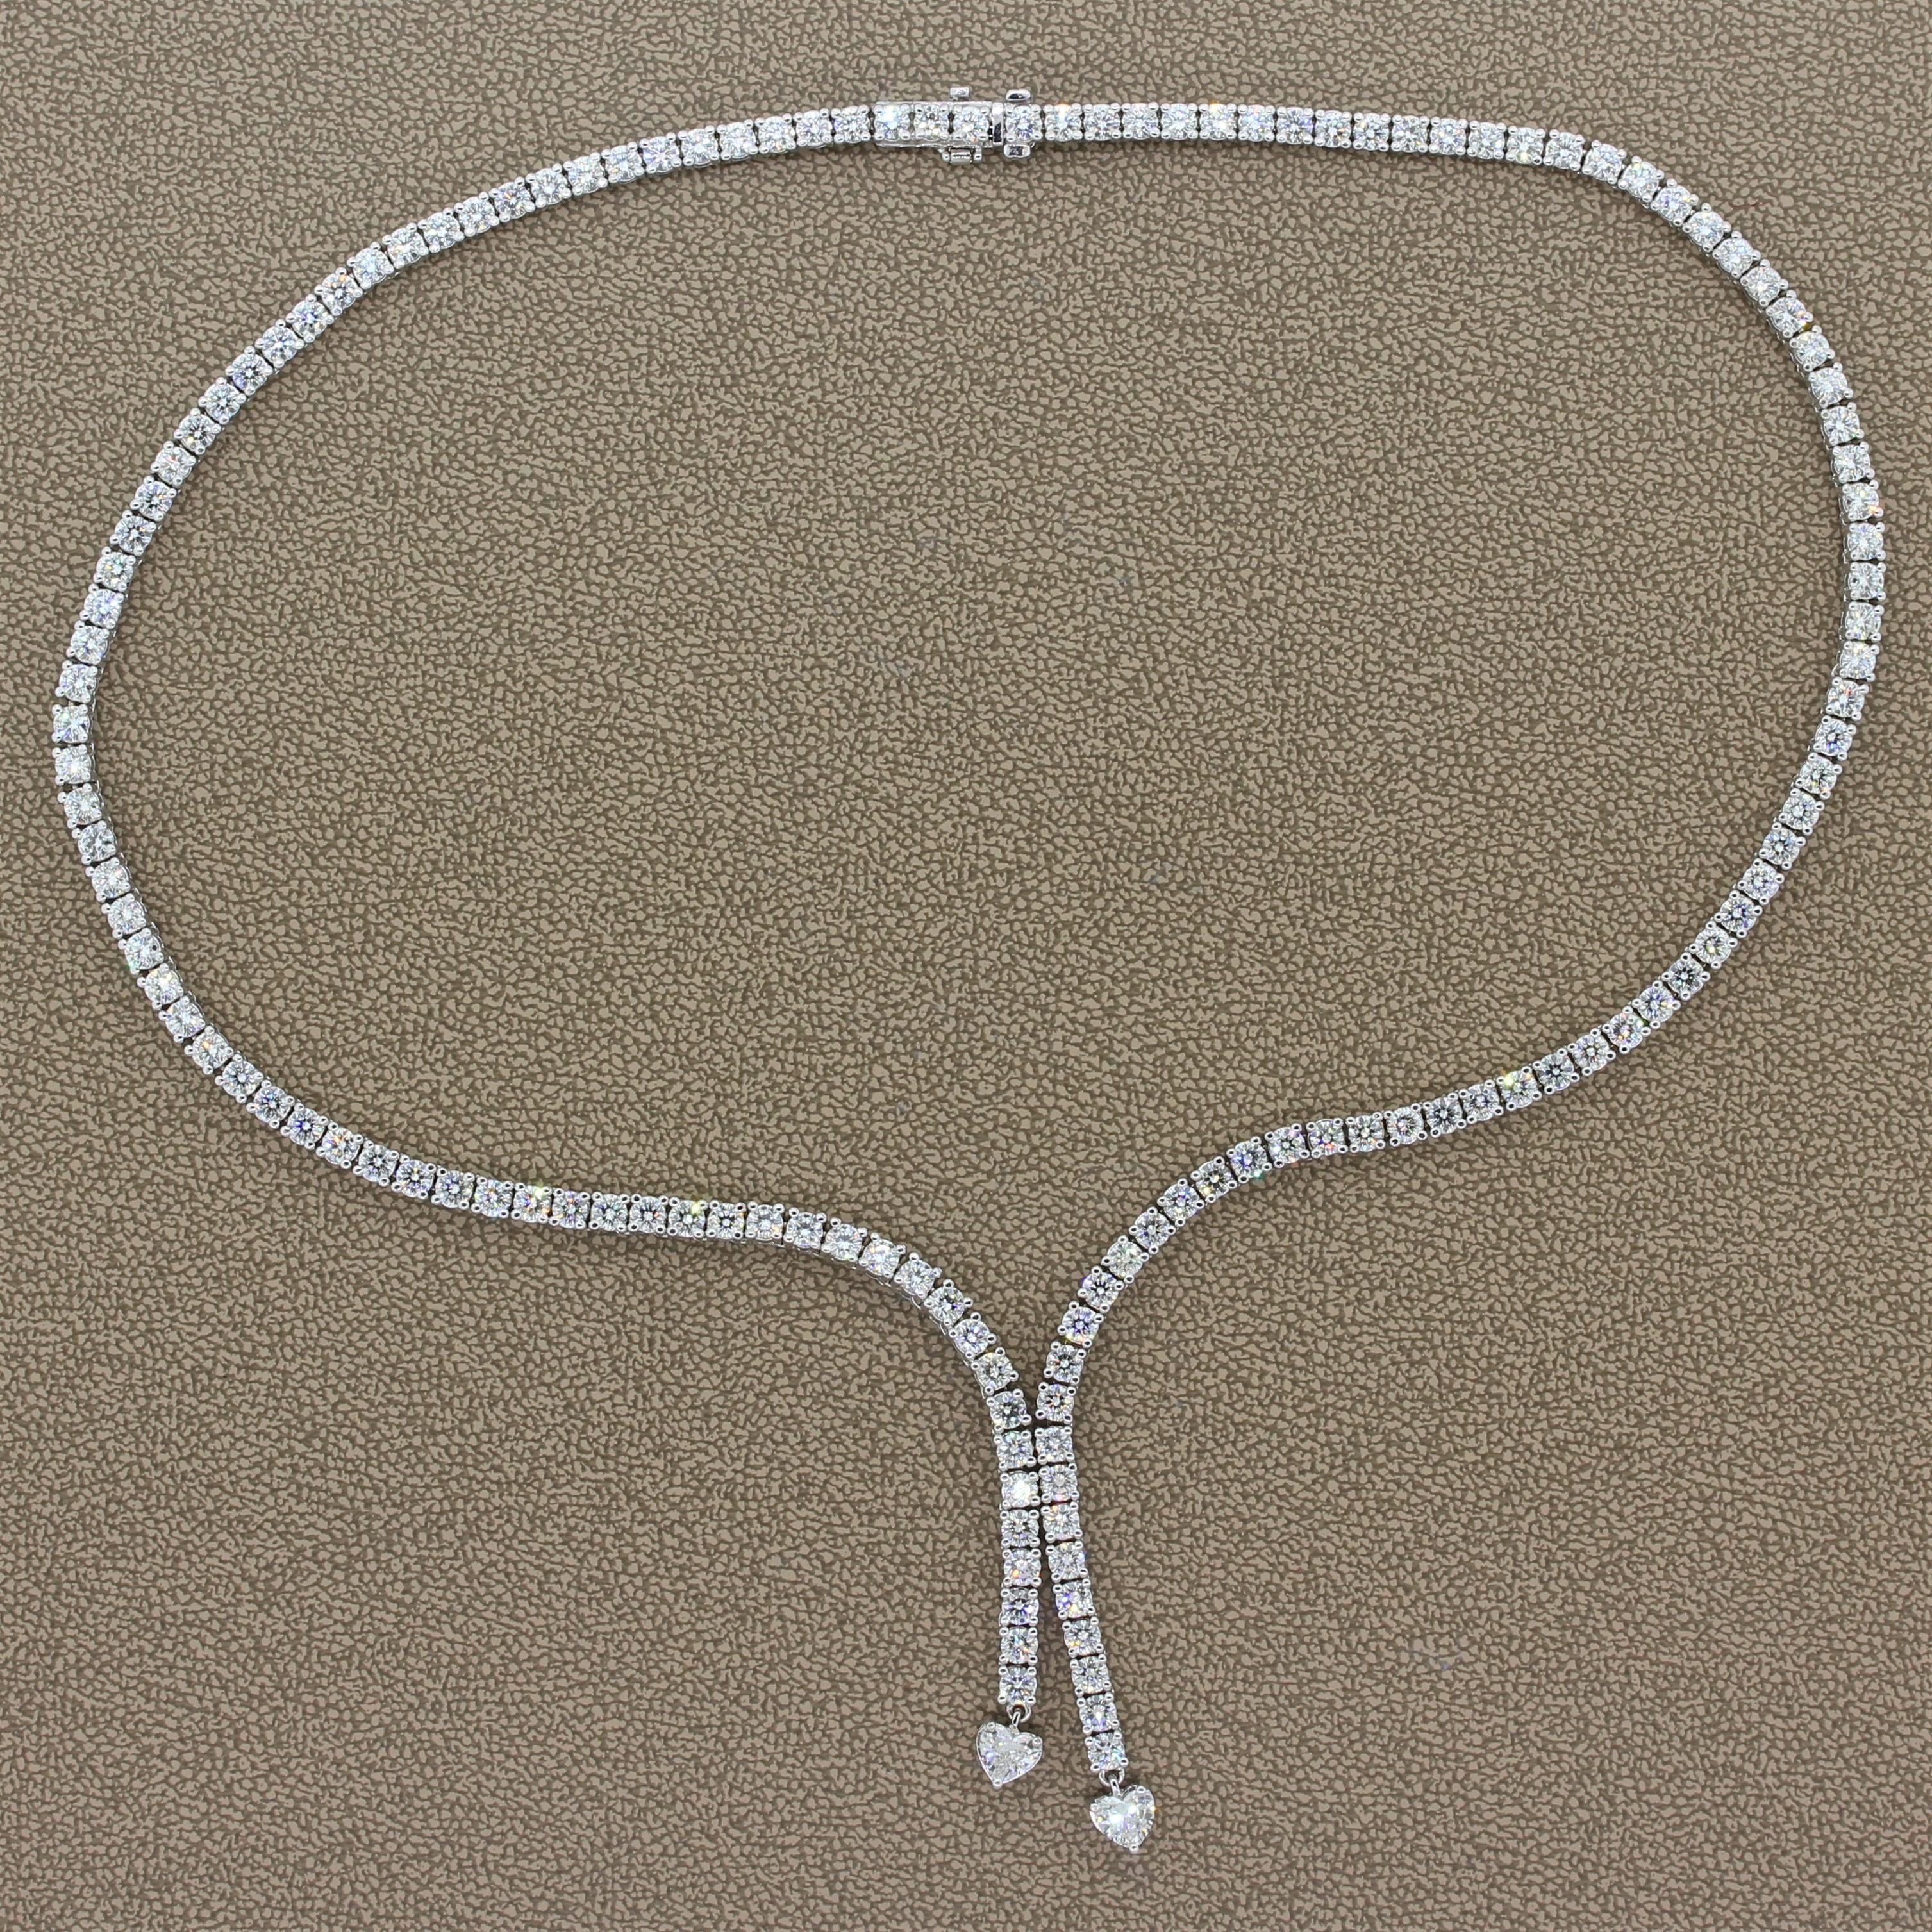 A feminine necklace with a different take on the classis tennis necklace. This sparkling necklace features 8.76 carats of VS quality round cut diamonds with two heart shape diamonds culminating the drop. The colorless diamonds are set in 18K white